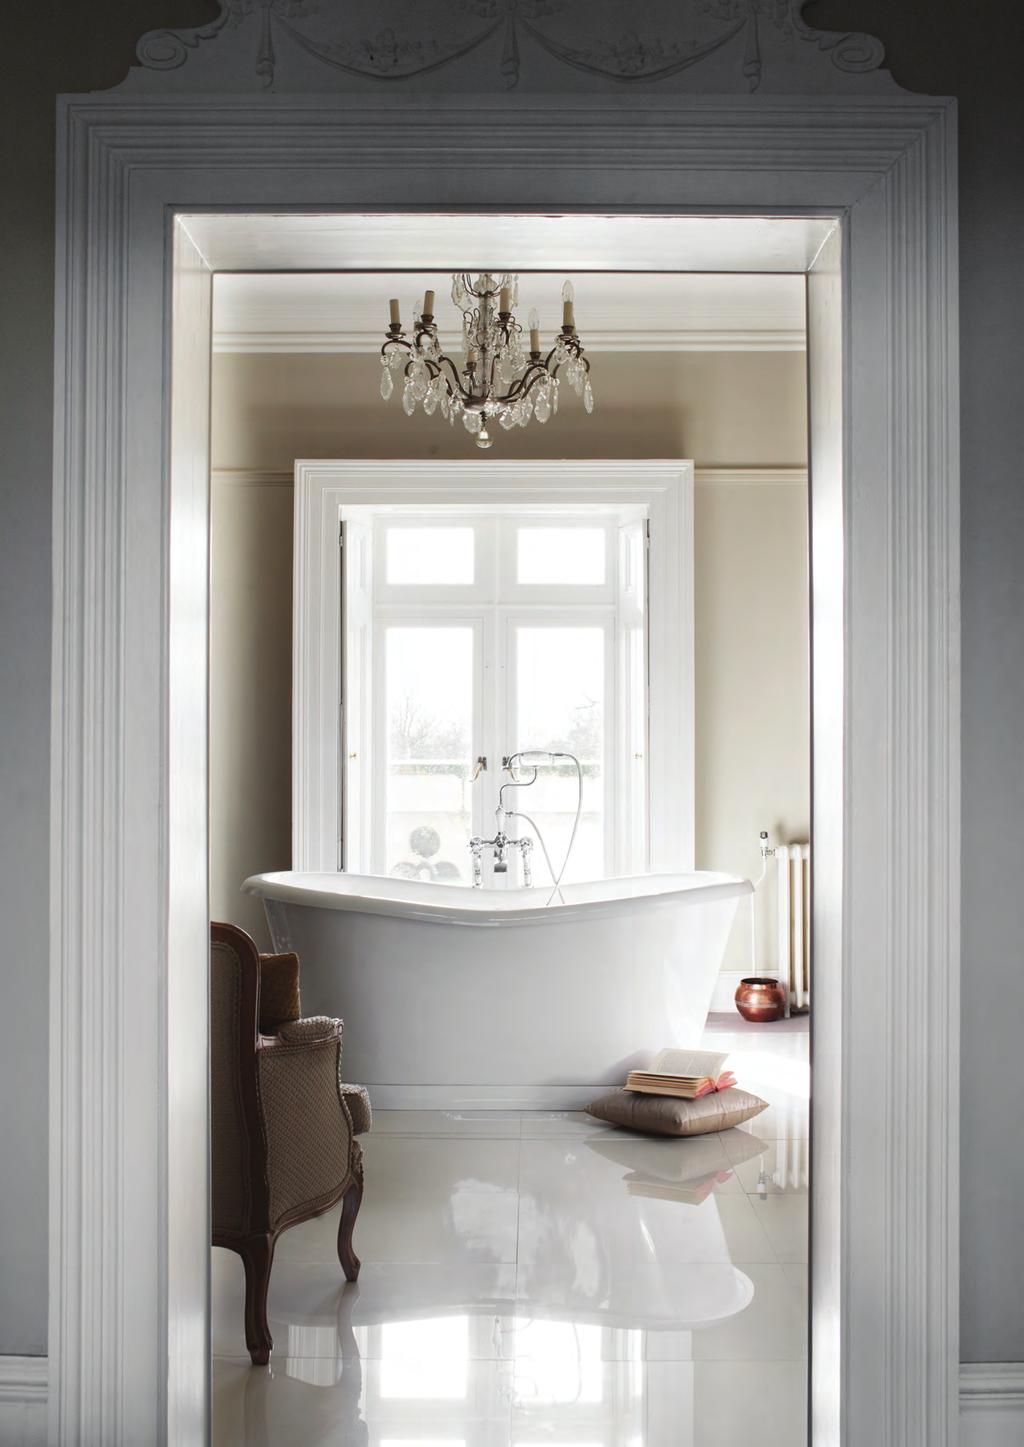 DOUBLE ENDED BATHS - ADMIRAL 180 & 165 BATHS BATHS ADMIRAL 180 & 165 This stunning, dramatic bath will provide a gorgeous centrepiece in any bathroom.